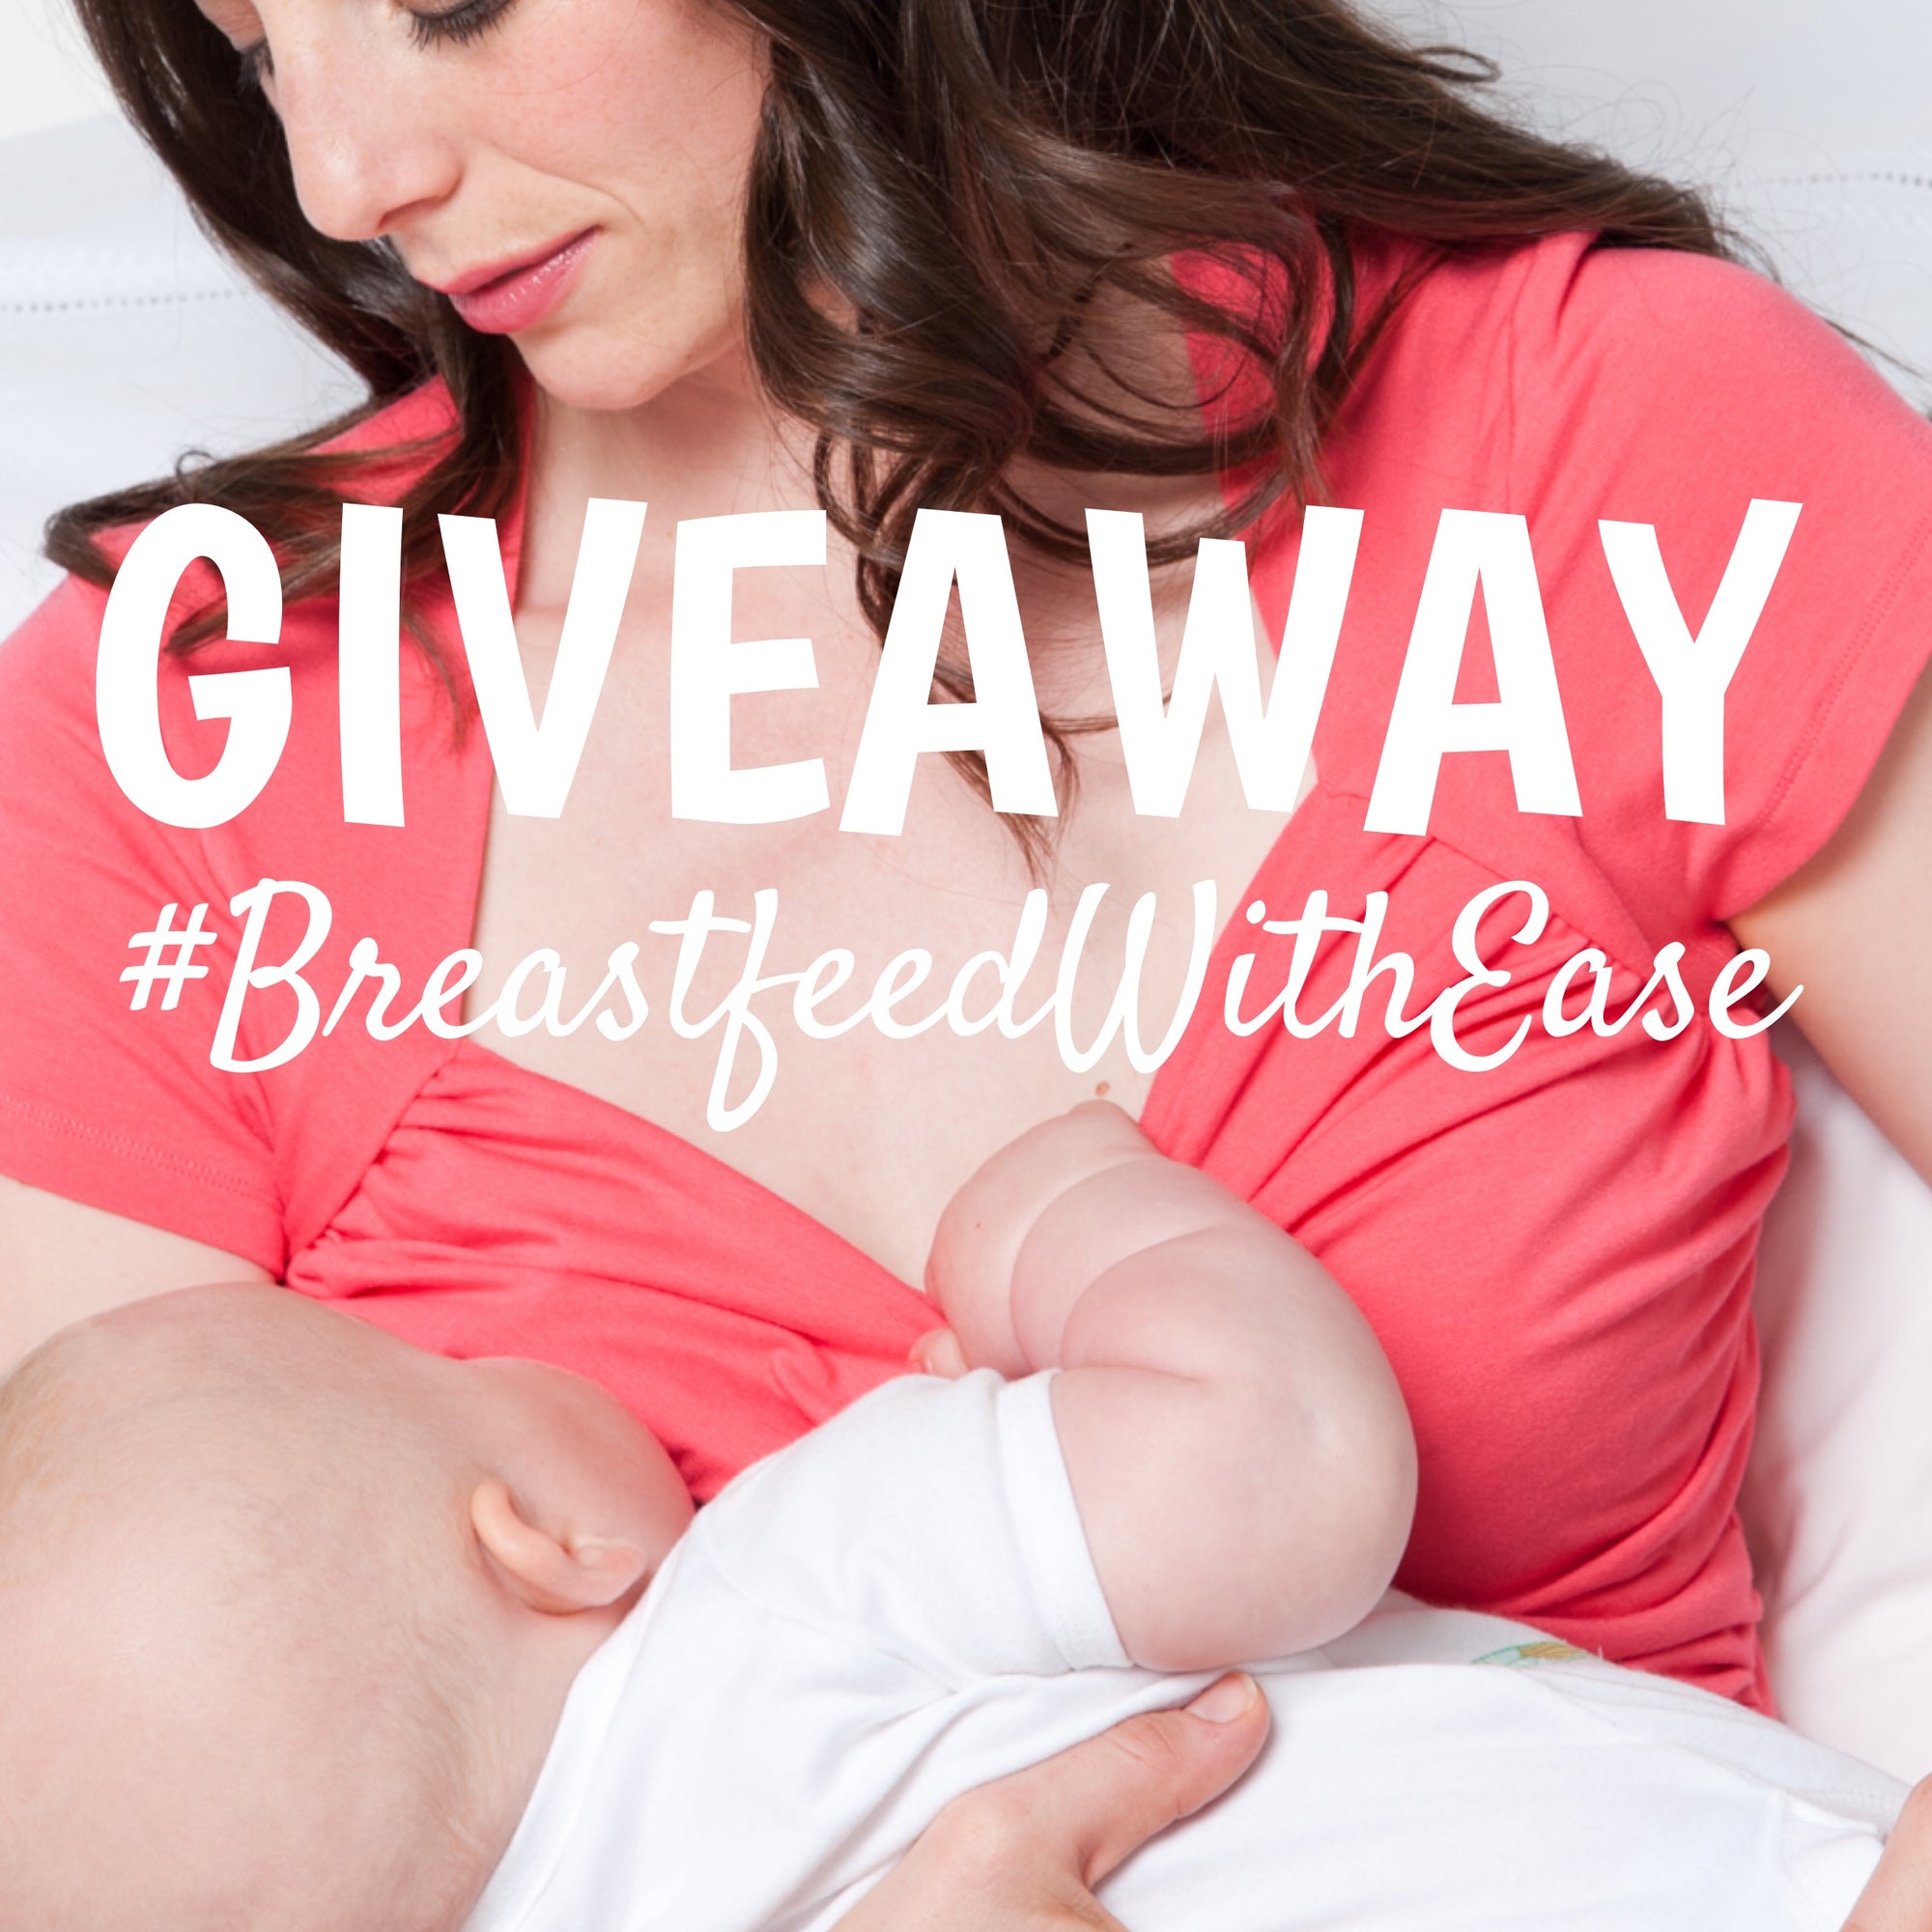 #BreastfeedWithEase Campaign aims to empower more women to breastfeed with confidence!